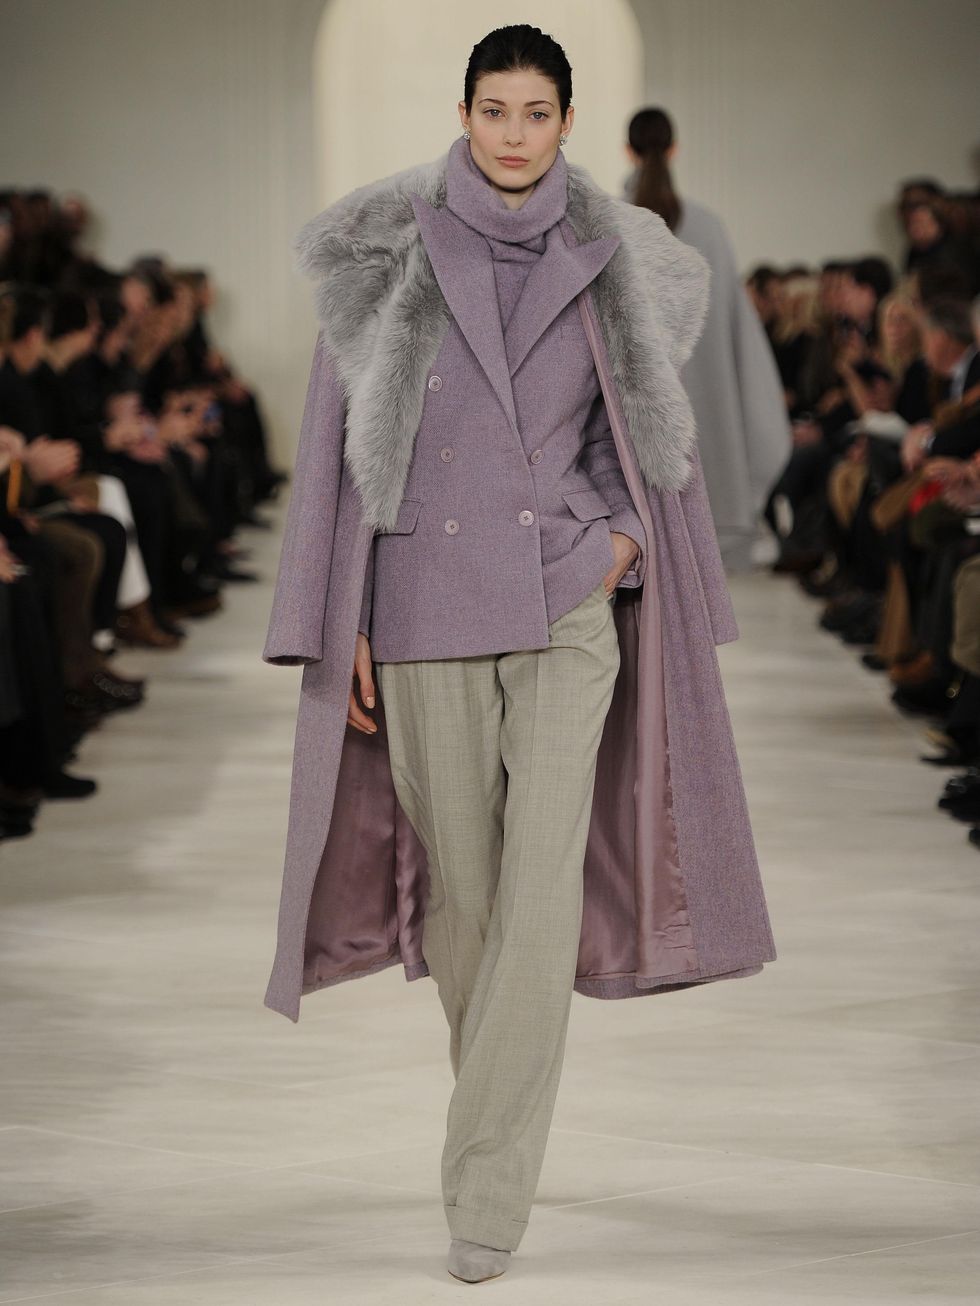 Ralph Lauren Collection fall collection February 2014